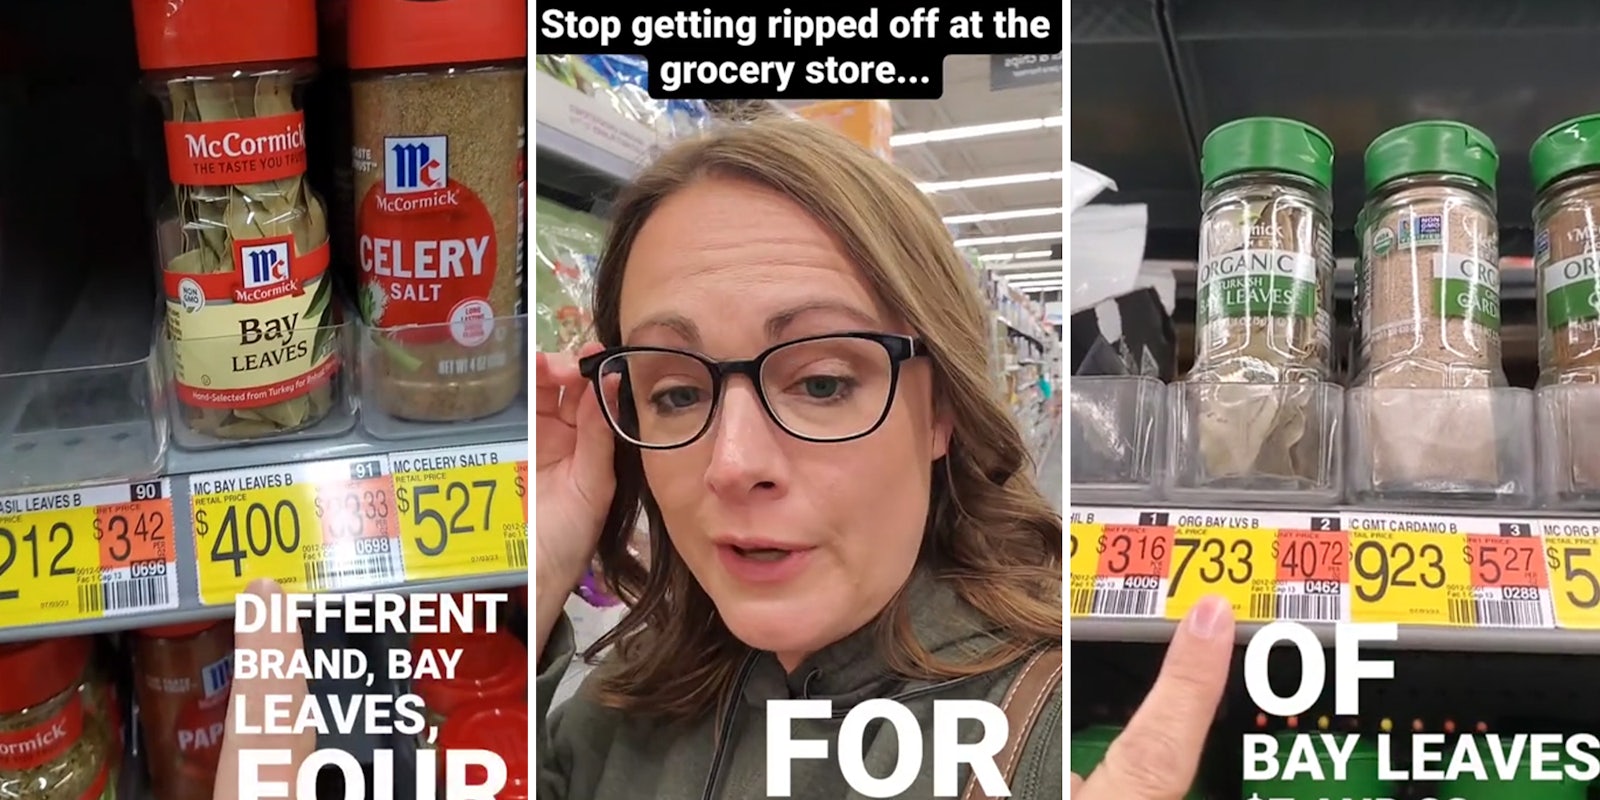 Woman shares how you may getting ripped off in the grocery store